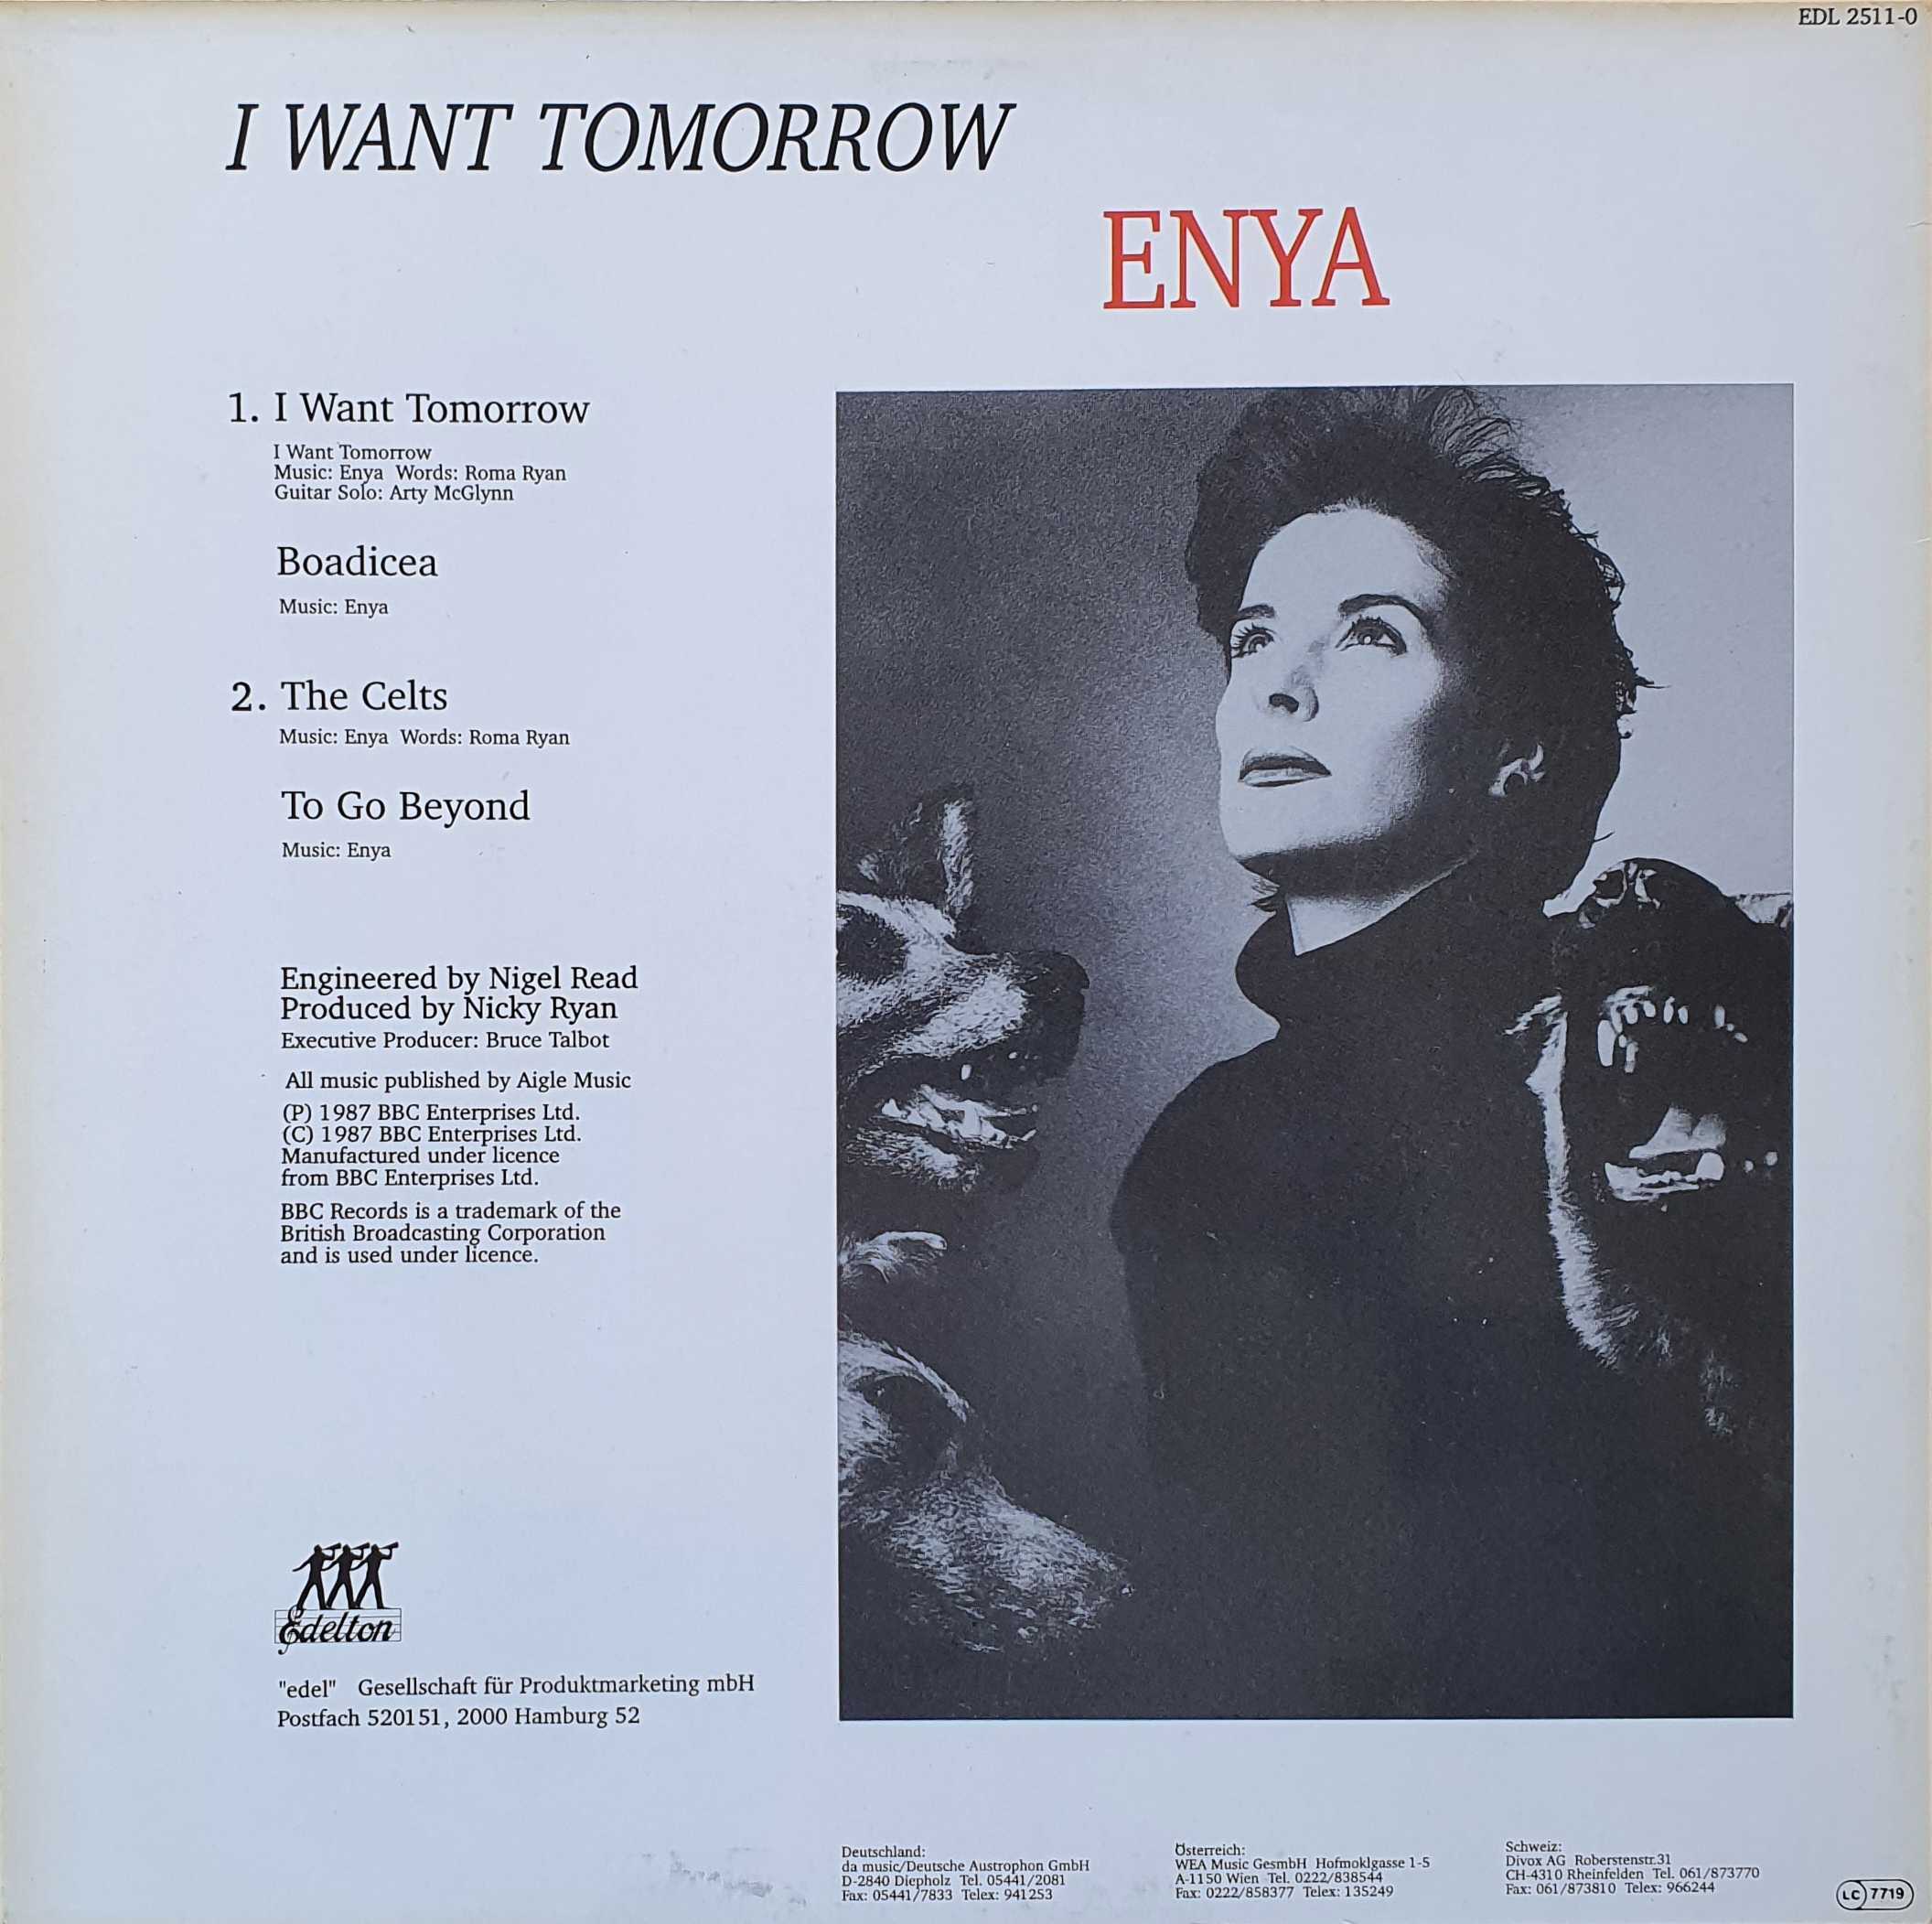 Picture of EDL 2511-0 I want tomorrow (The Celts) by artist Enya / Roma Ryan from the BBC records and Tapes library